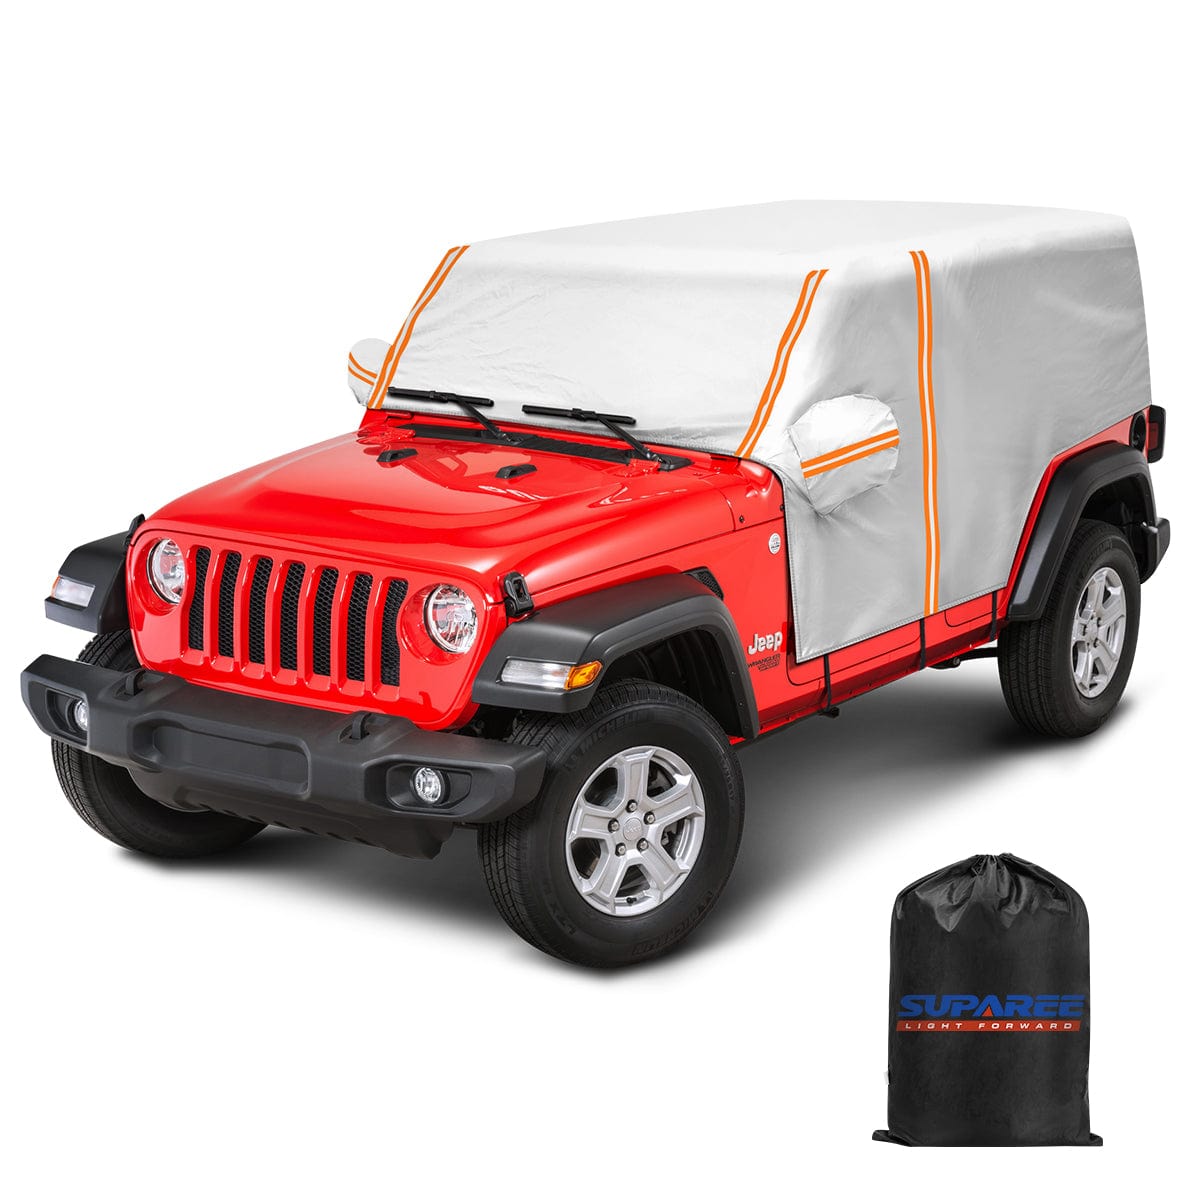 SUPAREE Jeep Cover Silver Suparee Jeep Cab Cover Waterproof for 2007-Later Wrangler JK JL 4 Door Product description